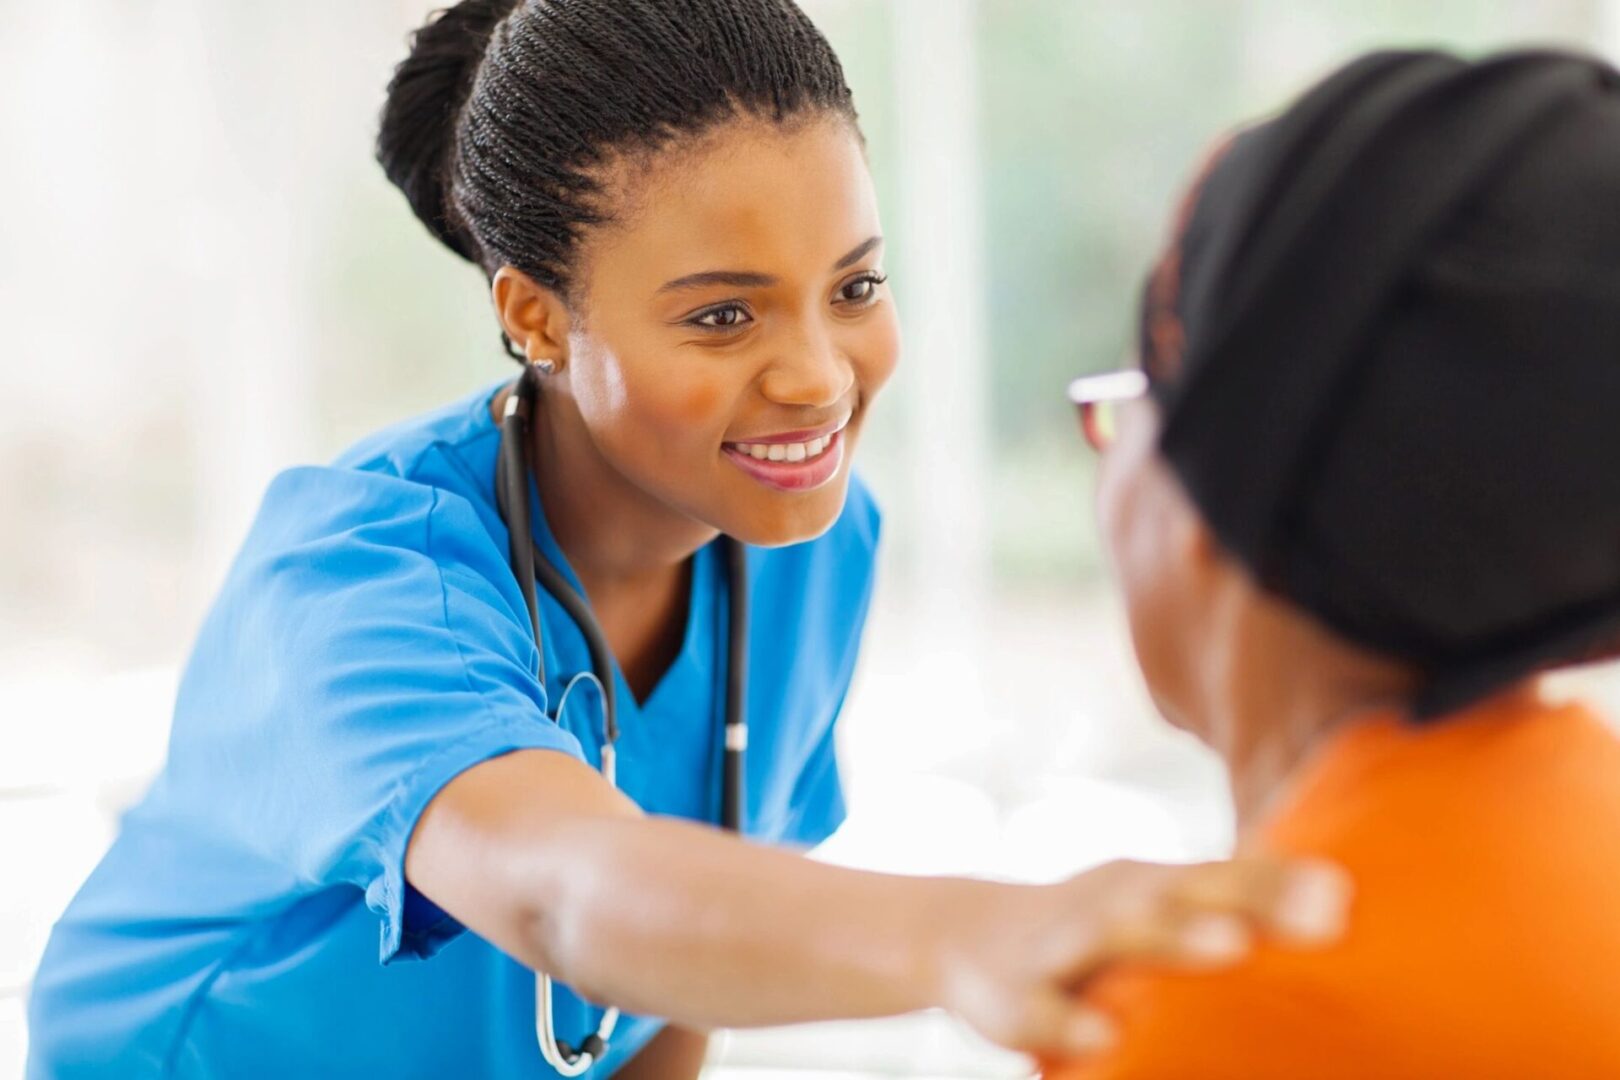 A nurse is smiling as she talks to someone.